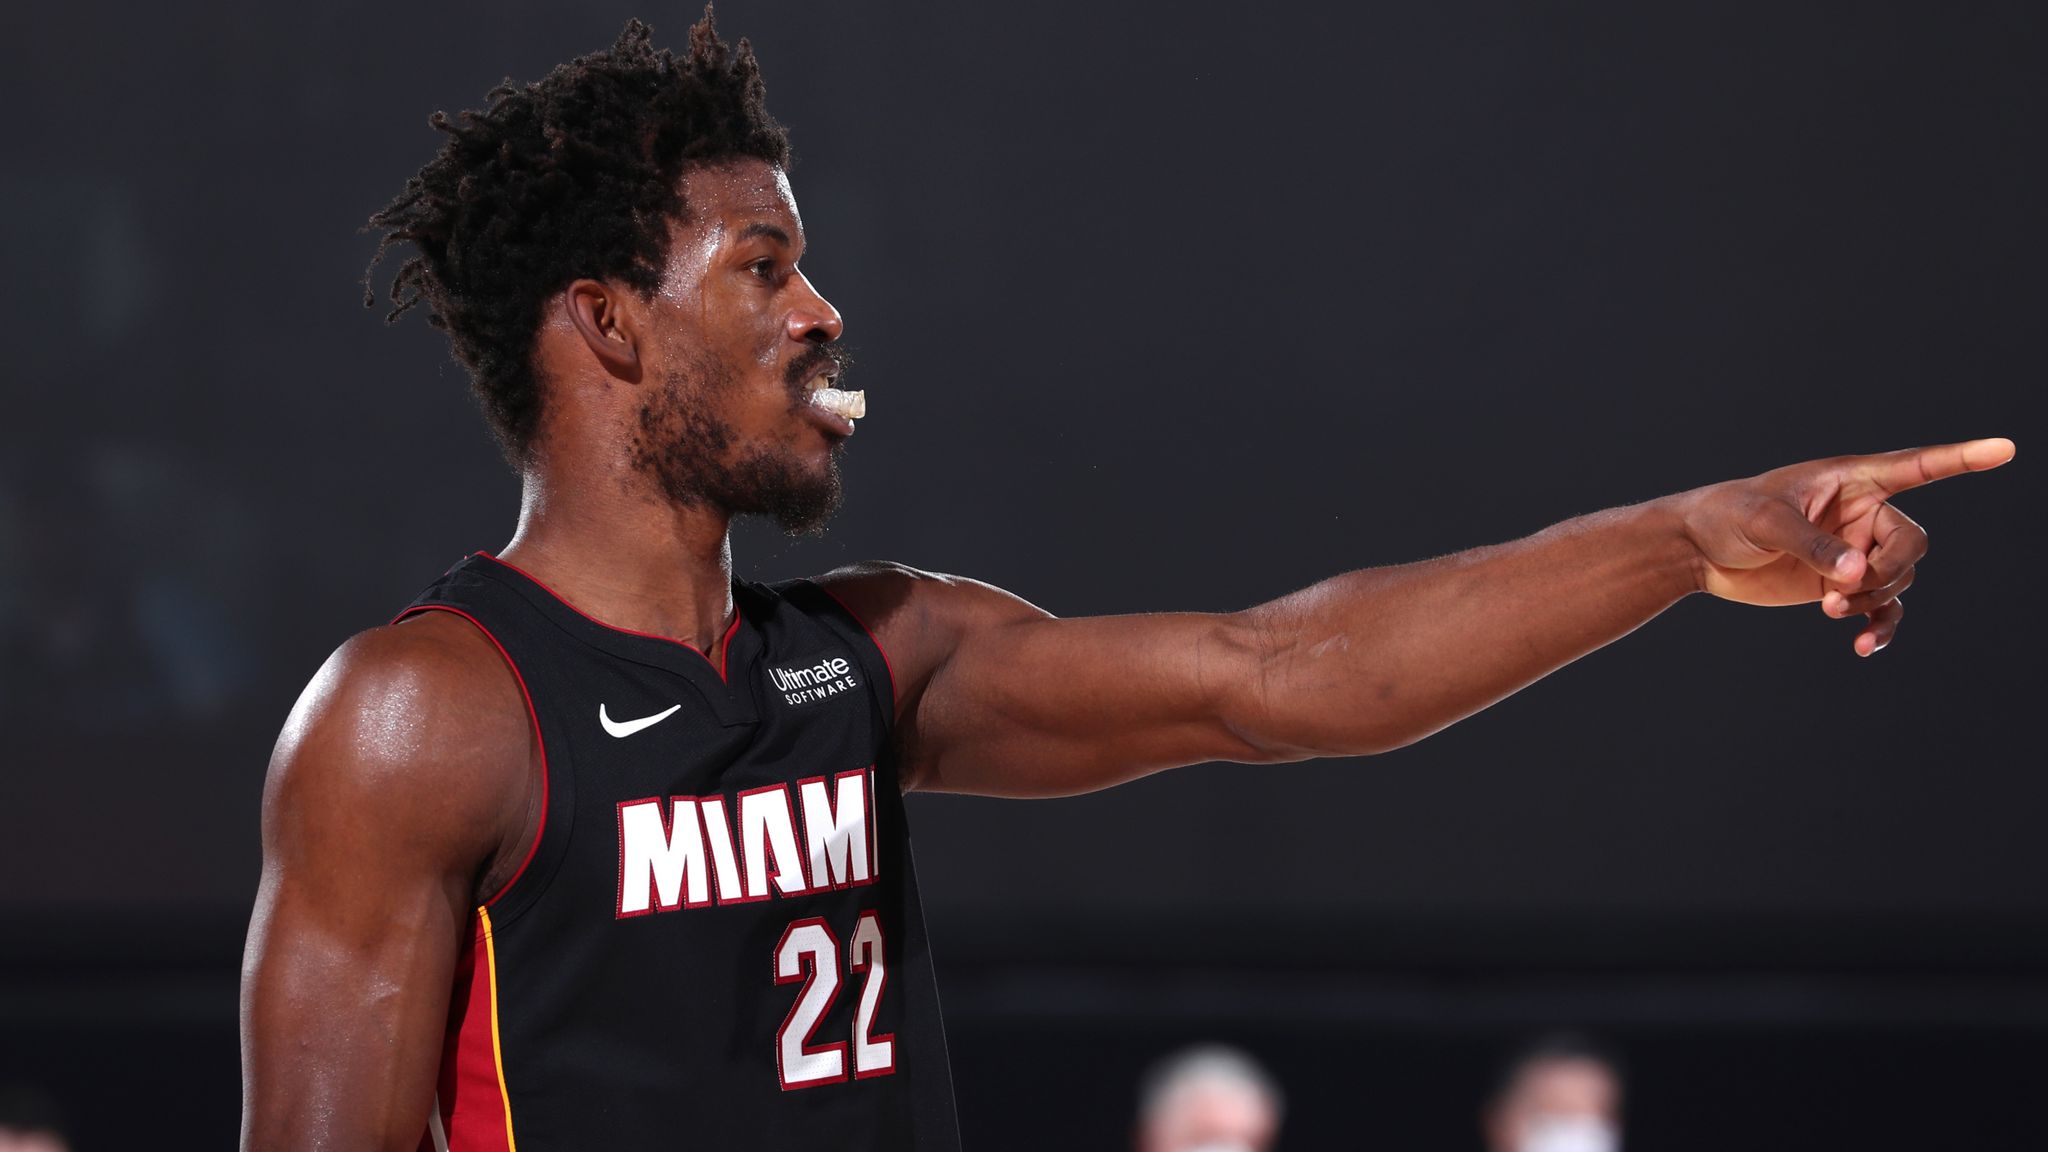 Miami Heat: Jimmy Butler does have a little Michael Jordan in him